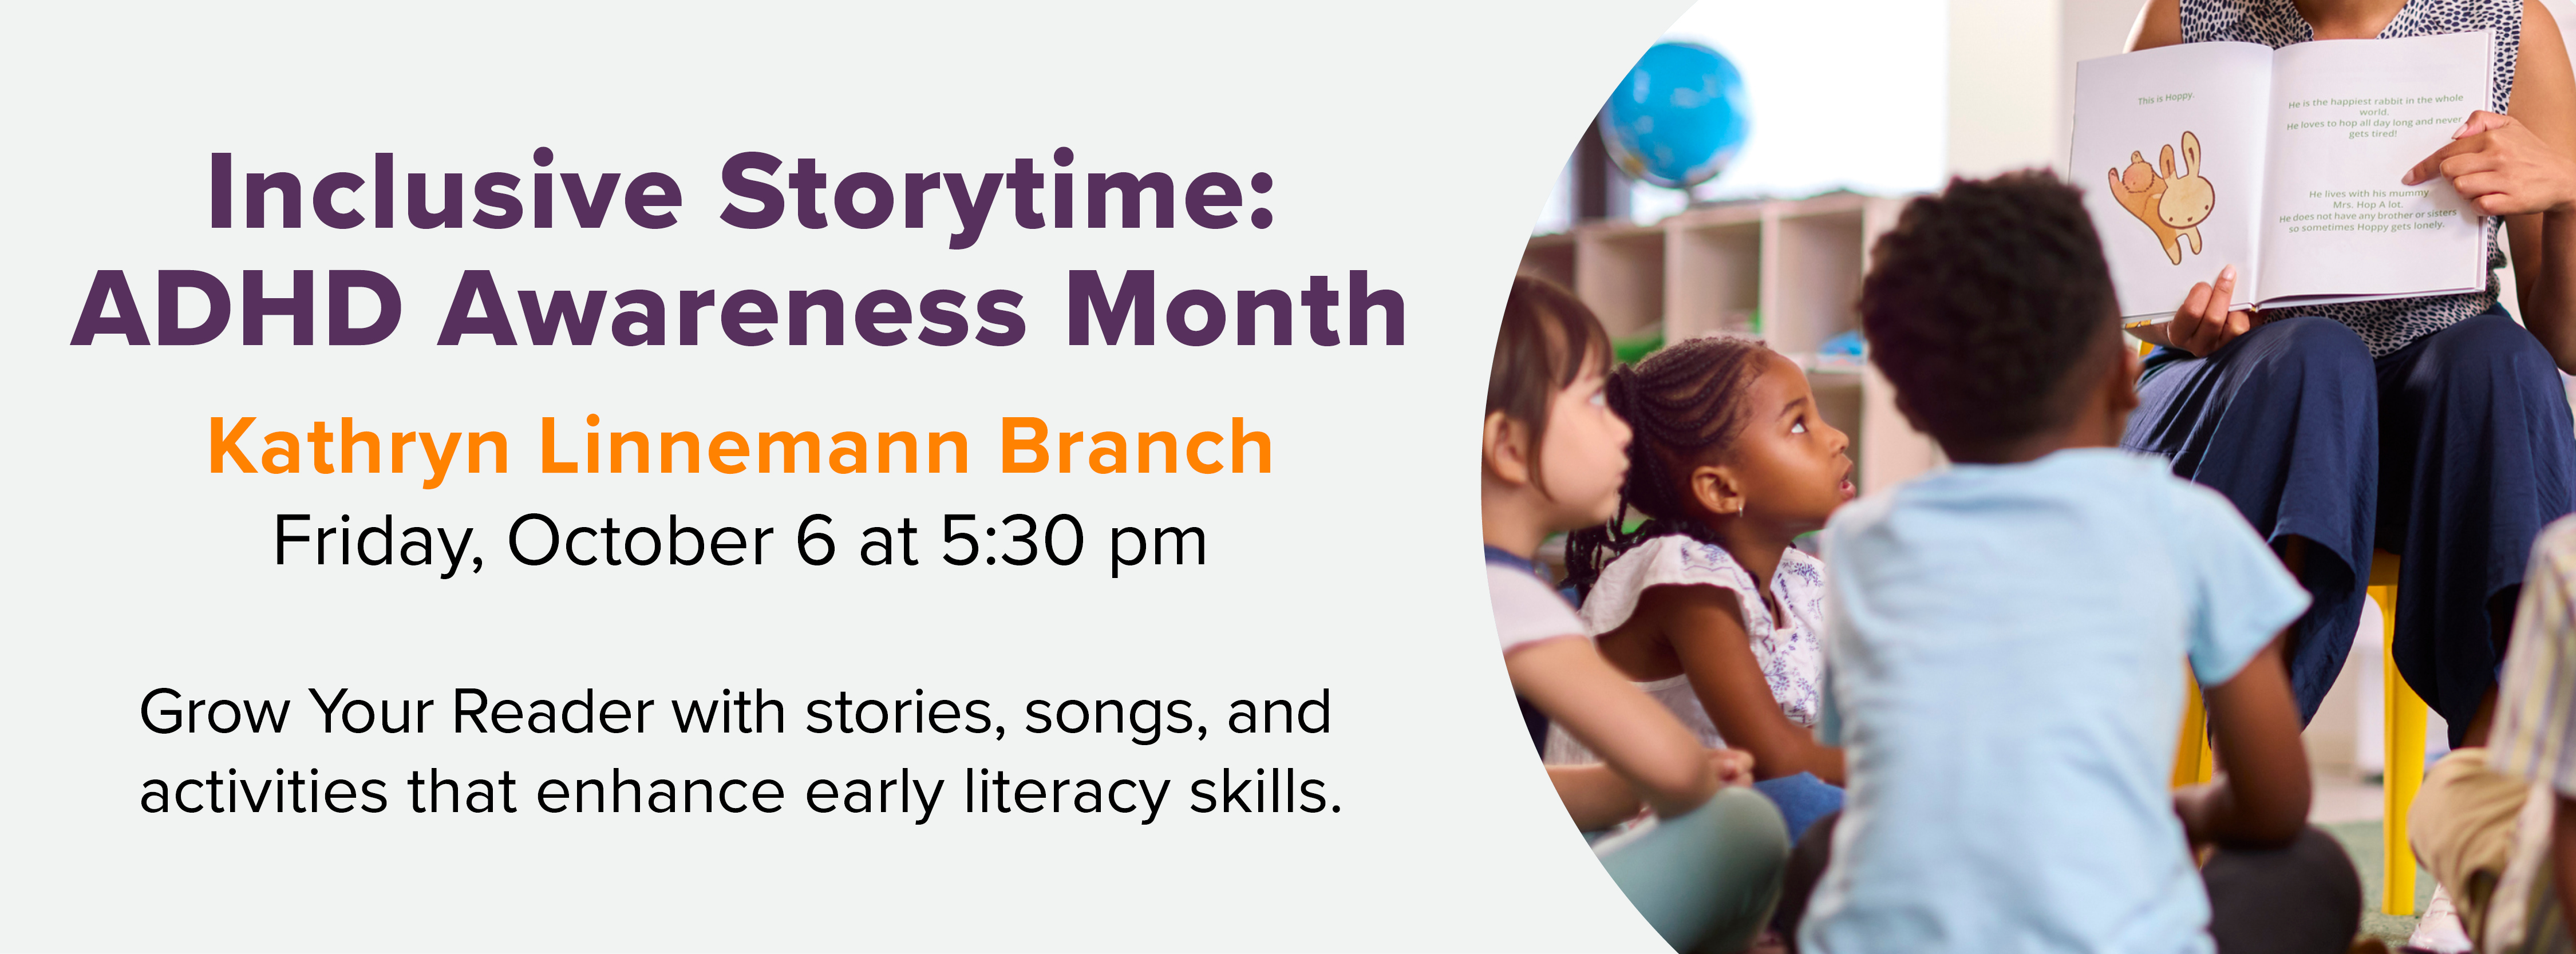 Inclusive Storytime: ADHD Awareness Month at Kathryn Linnemann, click for information.